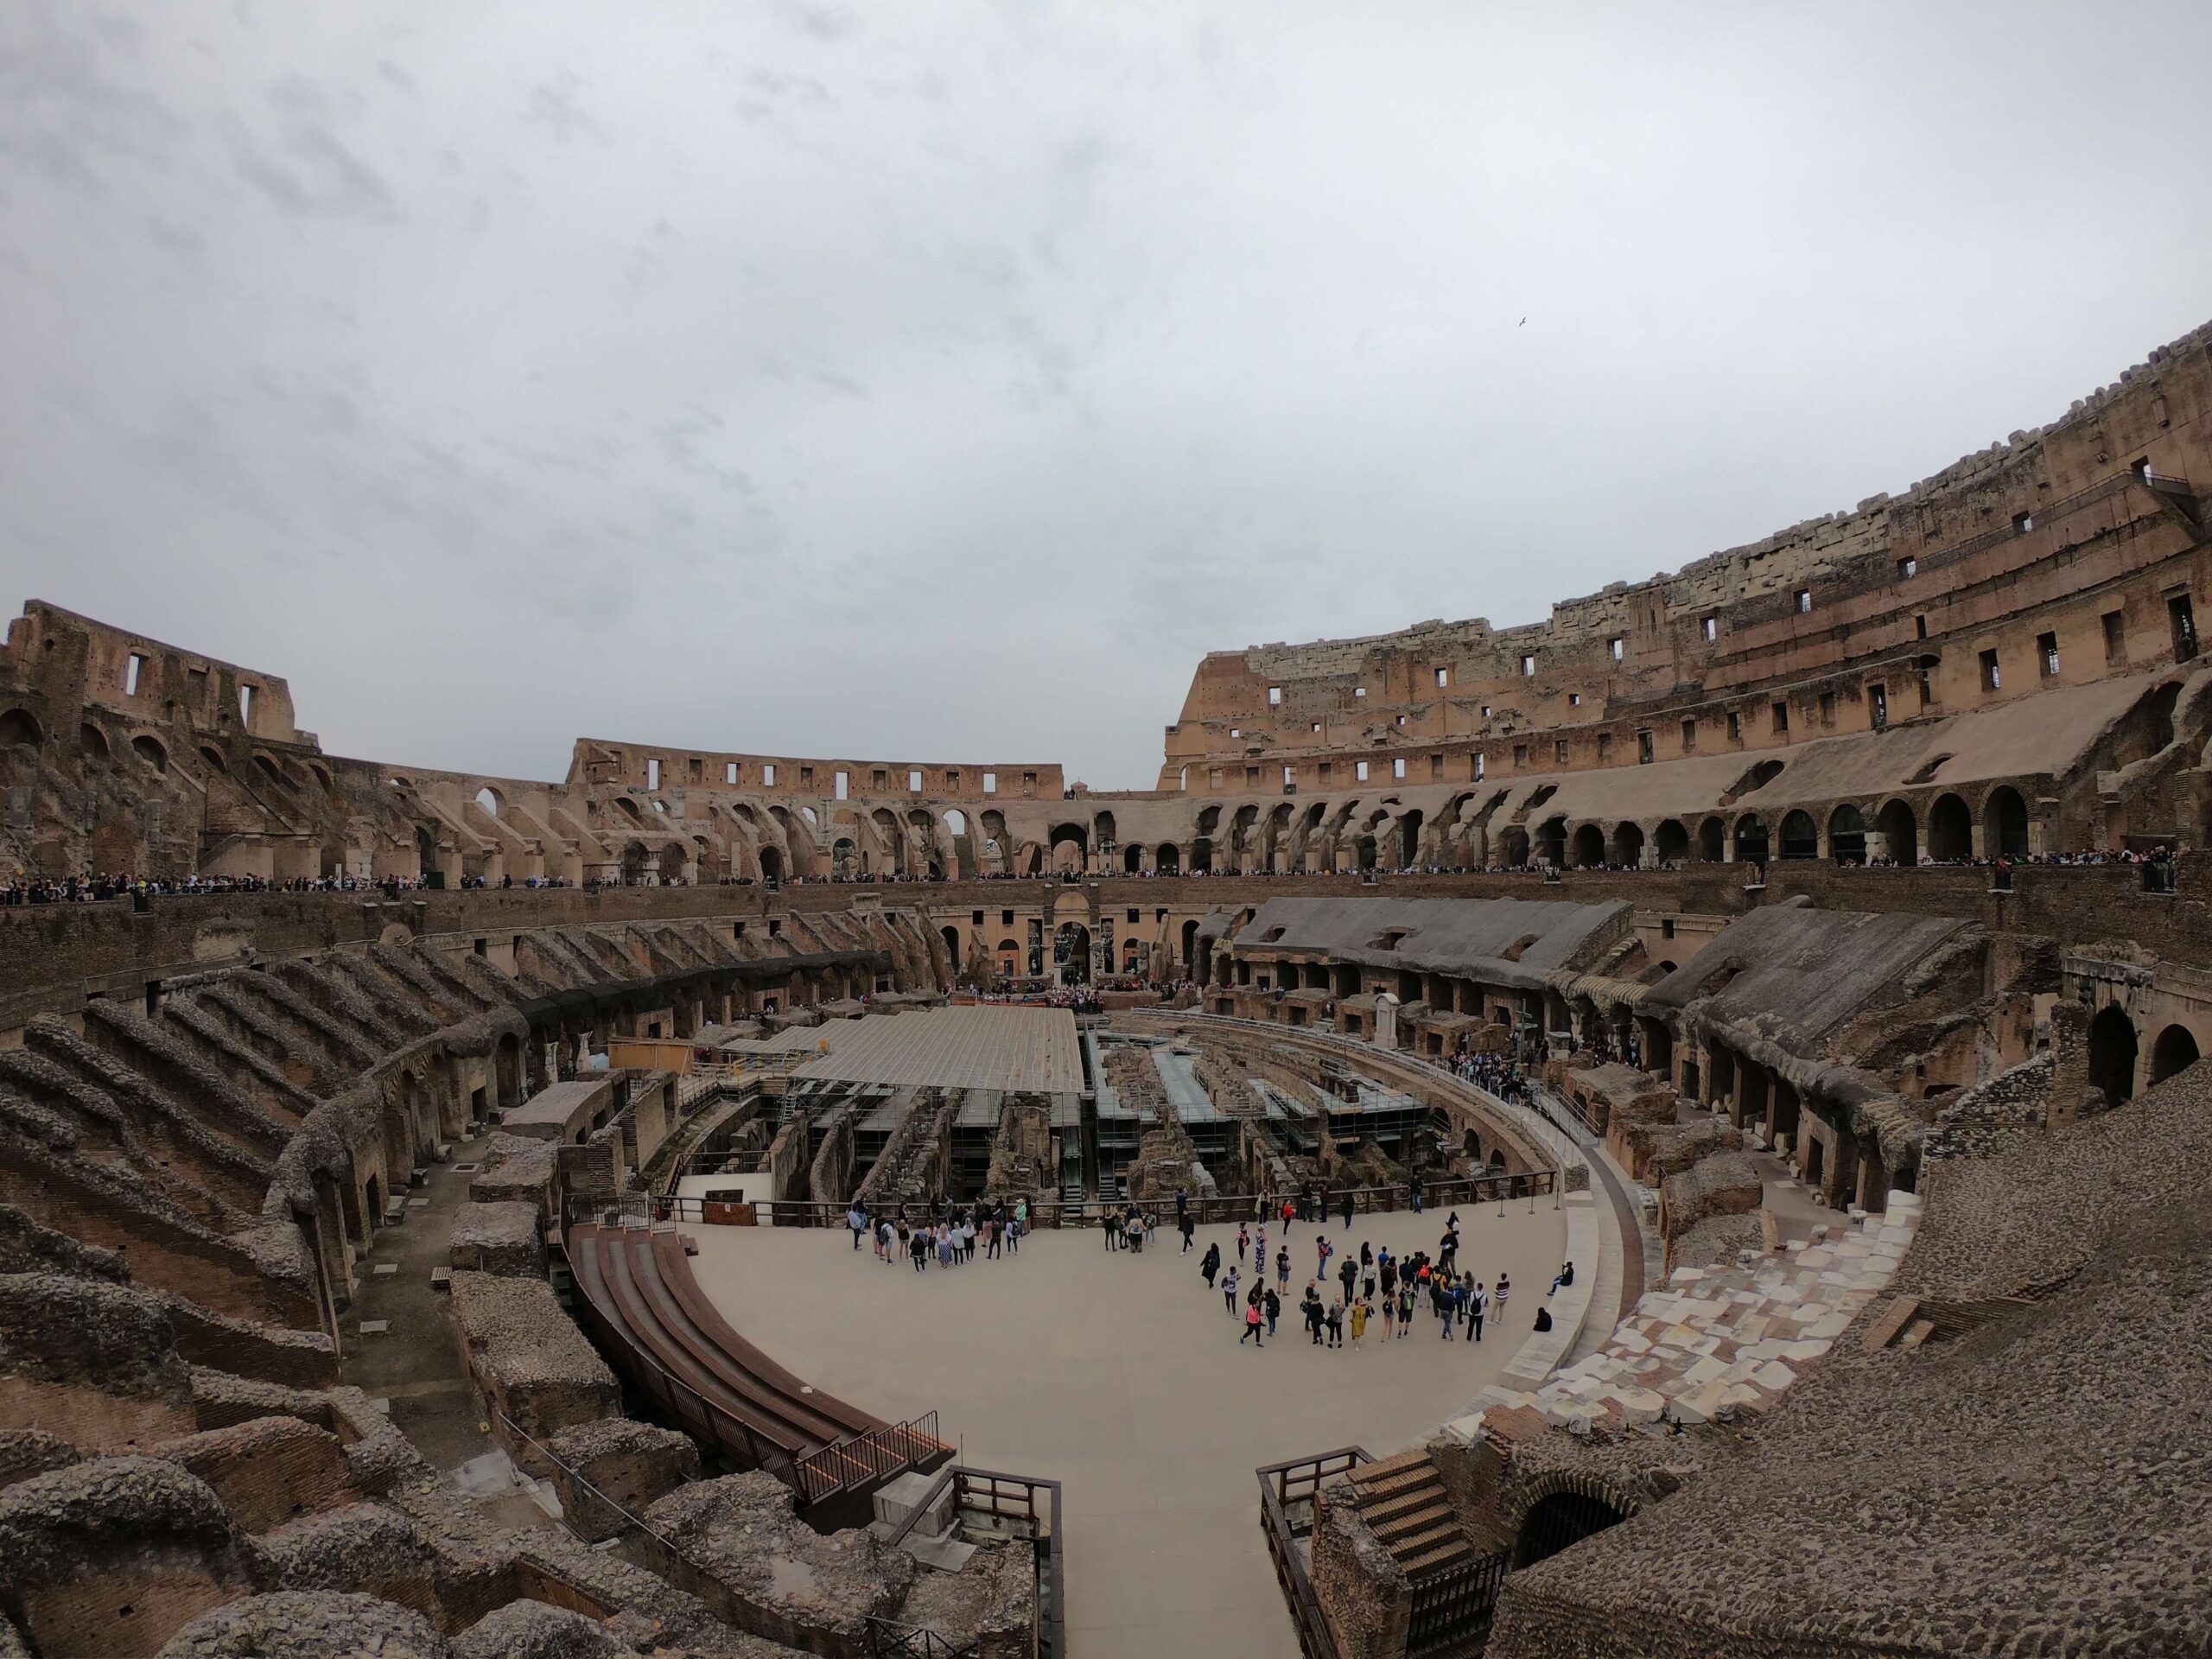 Upper-Level View of The Colosseum, Rome, Italy